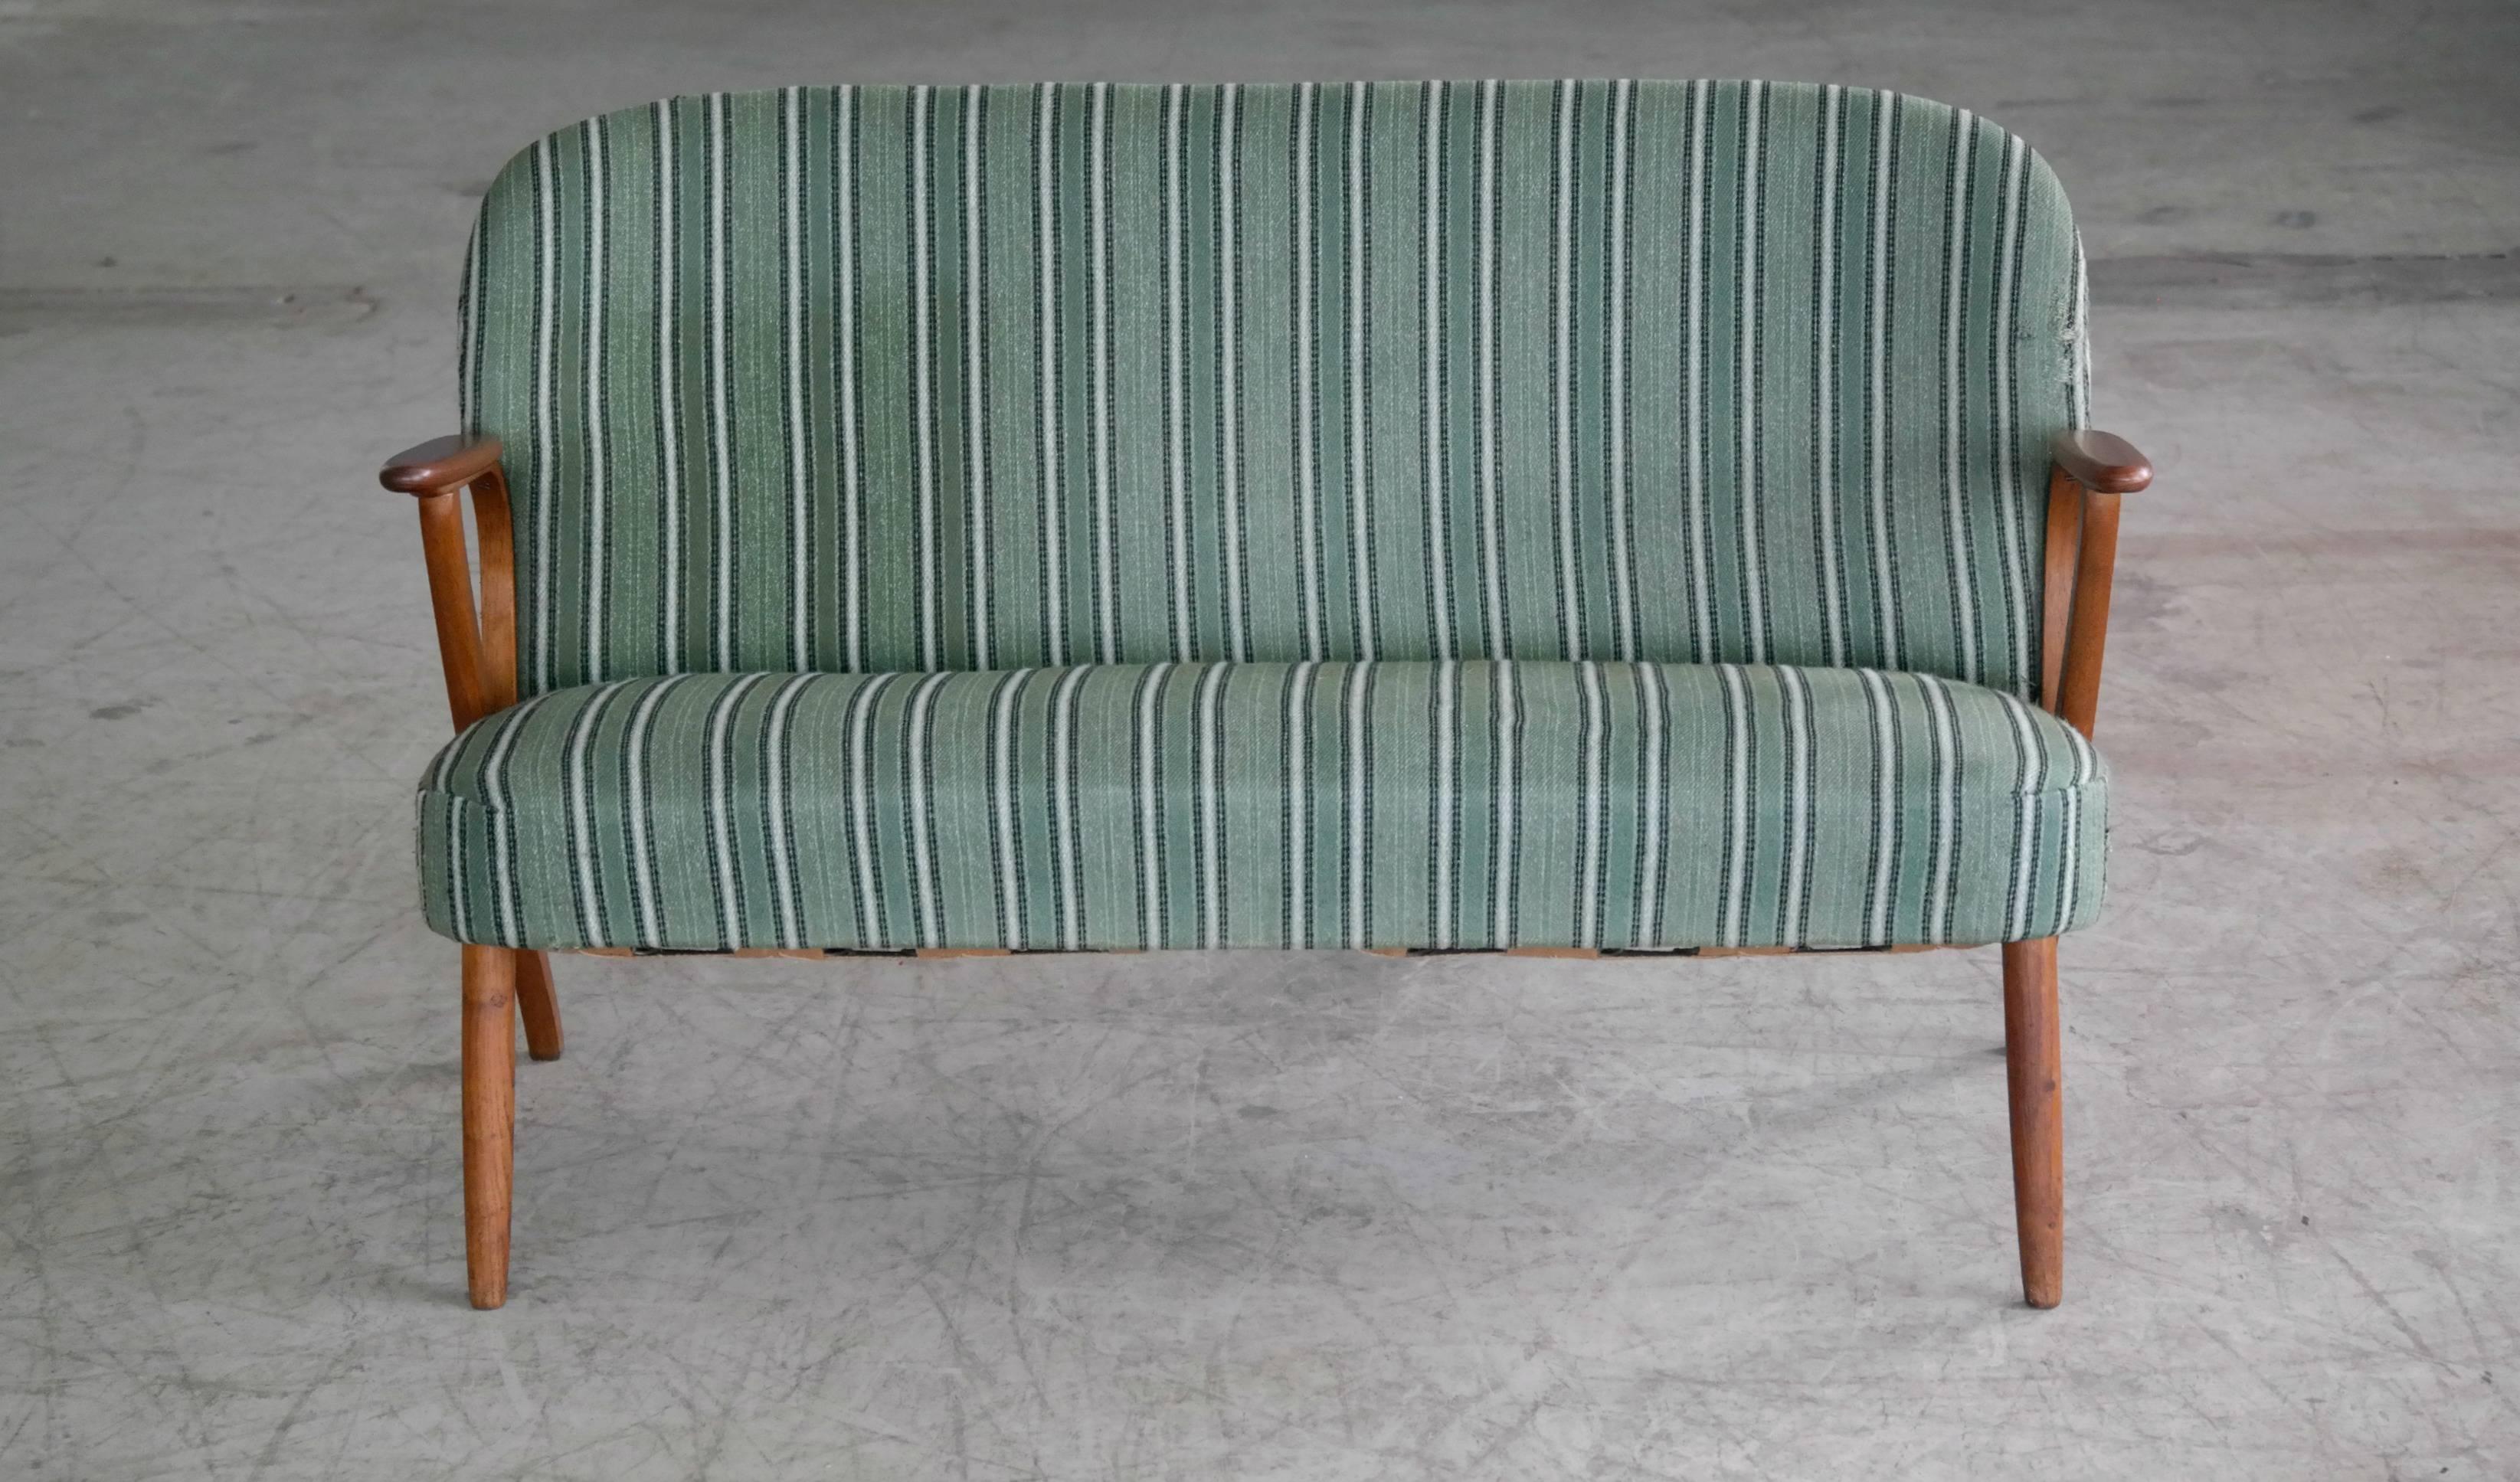 Beautiful and elegant small 1950s Danish sofa with legs and armrests in teak. The high quality woodwork and design is very much in the style of Kurt Olsen and N.A. Jorgensen (Bramin Mobler) but it is unmarked and a rare piece and we cannot be